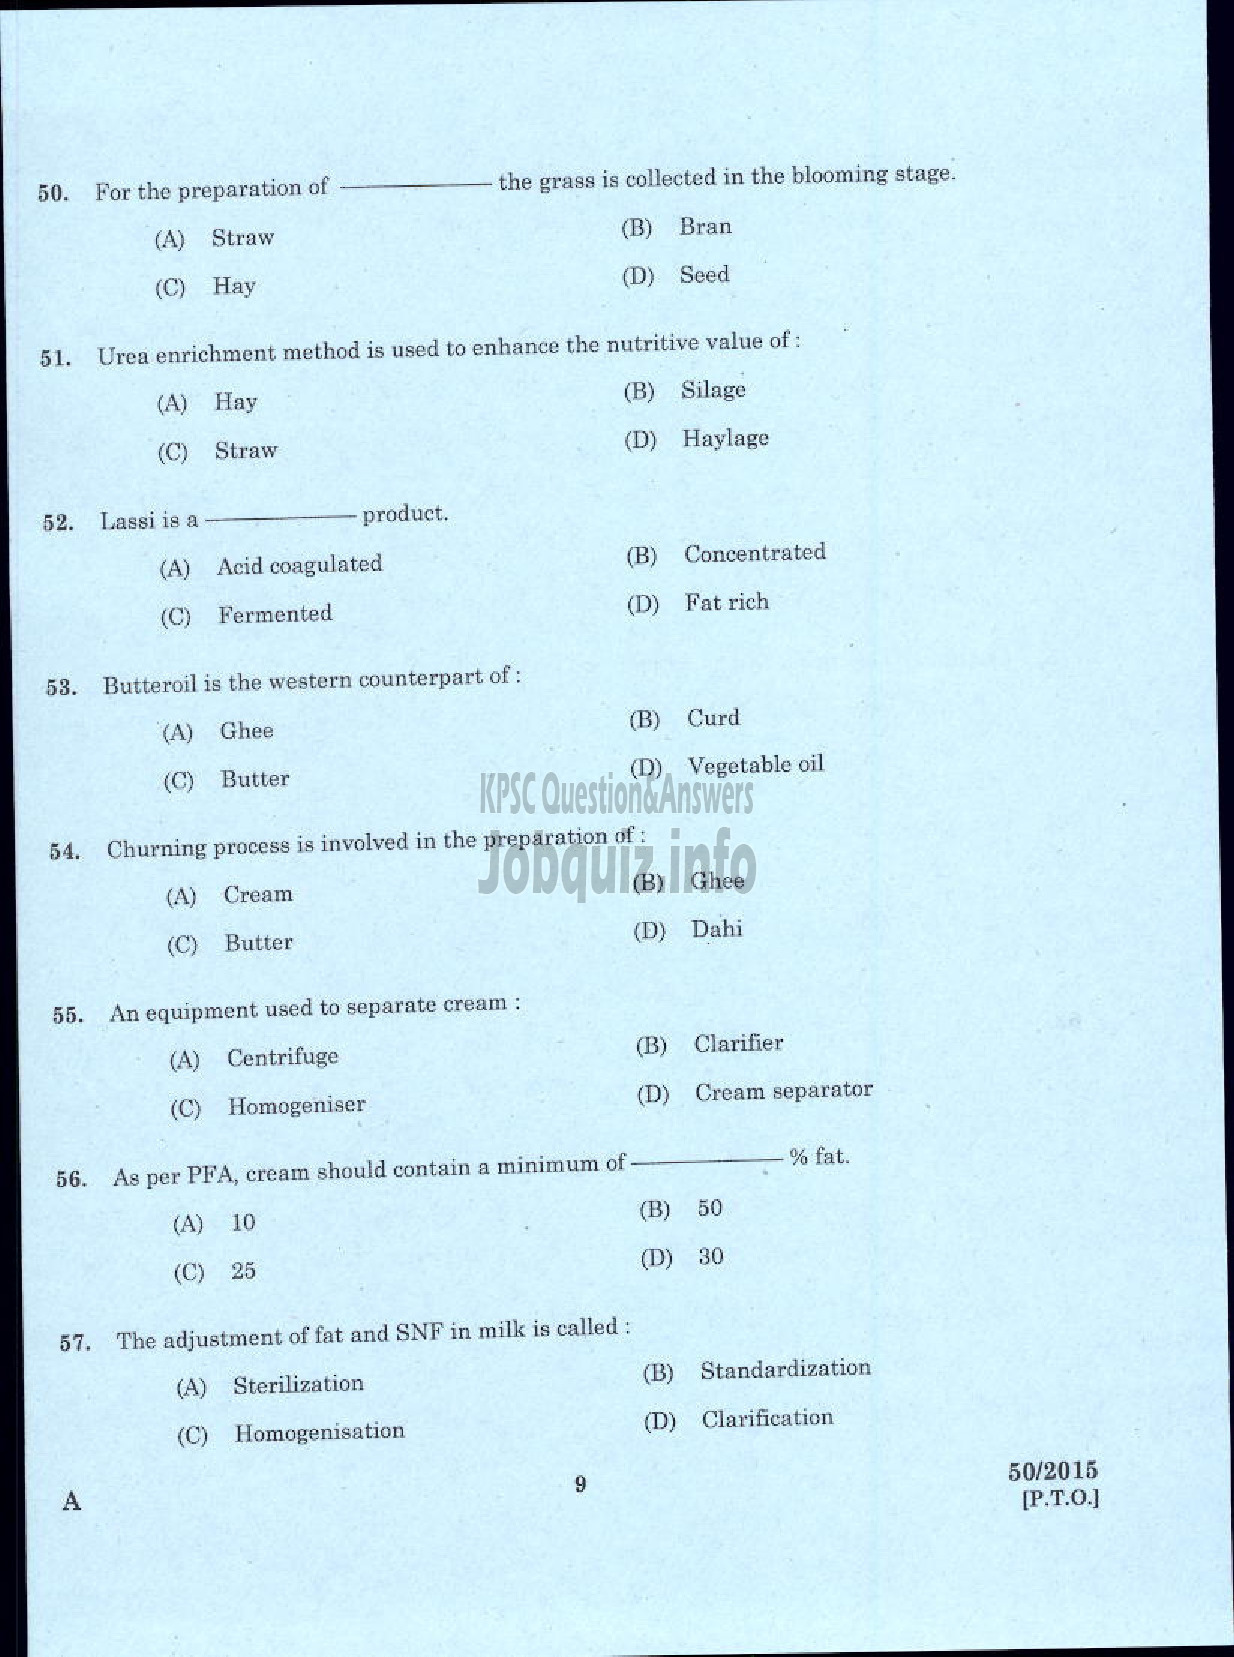 Kerala PSC Question Paper - LABORATORY TECHNICAL ASSISTANT DAIRYING AND MILK PRODUCTS VOCATIONAL HIGHER SECONDARY EDUCATION-7